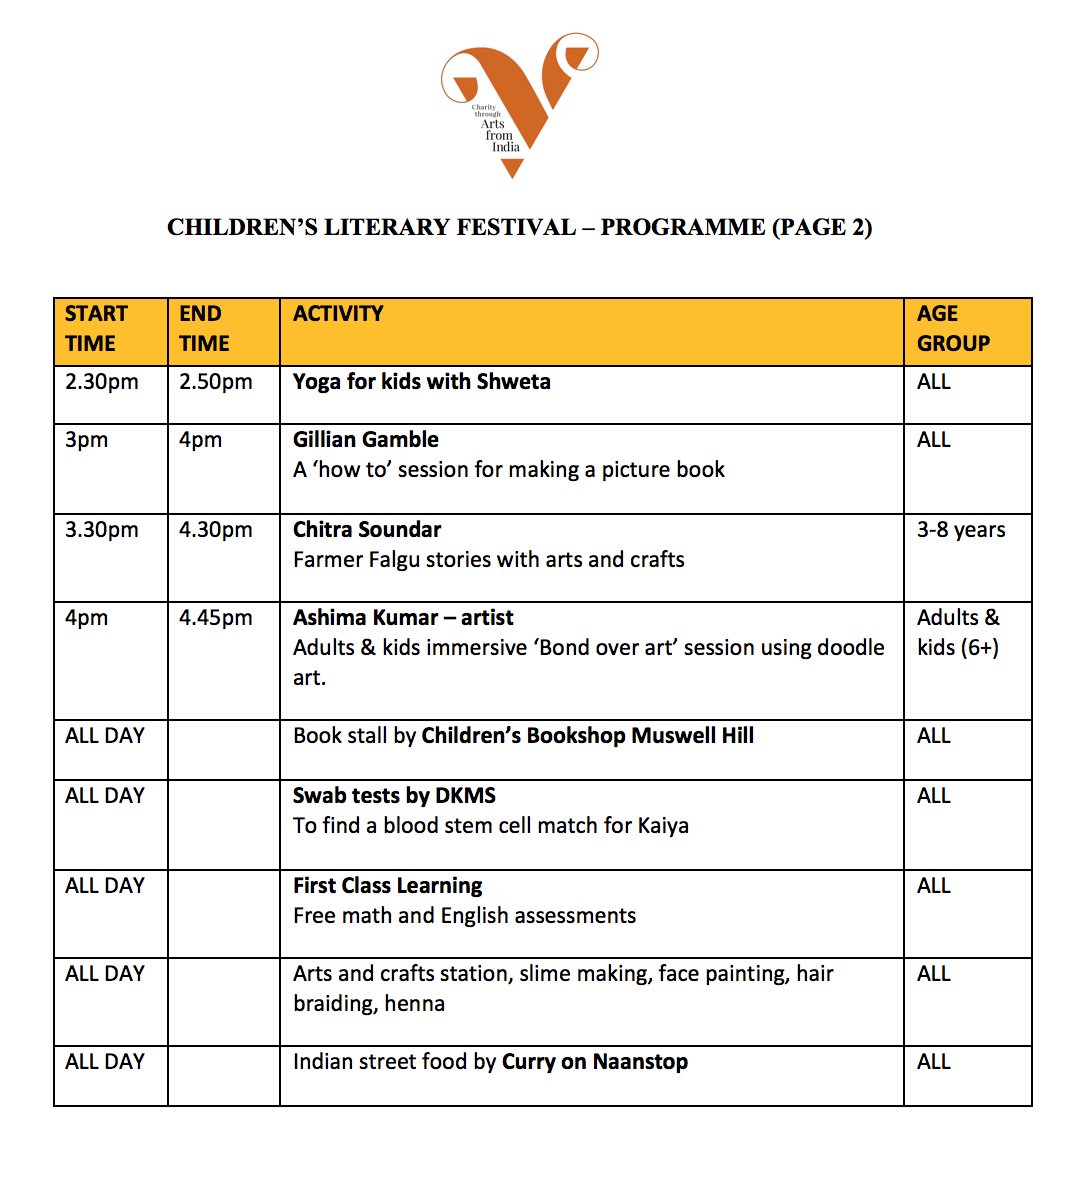 Plan ur day at Vidyapath's Children's Literary Fest with our programme guide below. Not booked yet? Go to vidyapath.com/clf to save yourself 20% on the door prices @csoundar  @SachdevPatel @writejemmawayne @NayanikaMahtani @shrabanibasu_ @GillGamble #kidsdayout #litfest